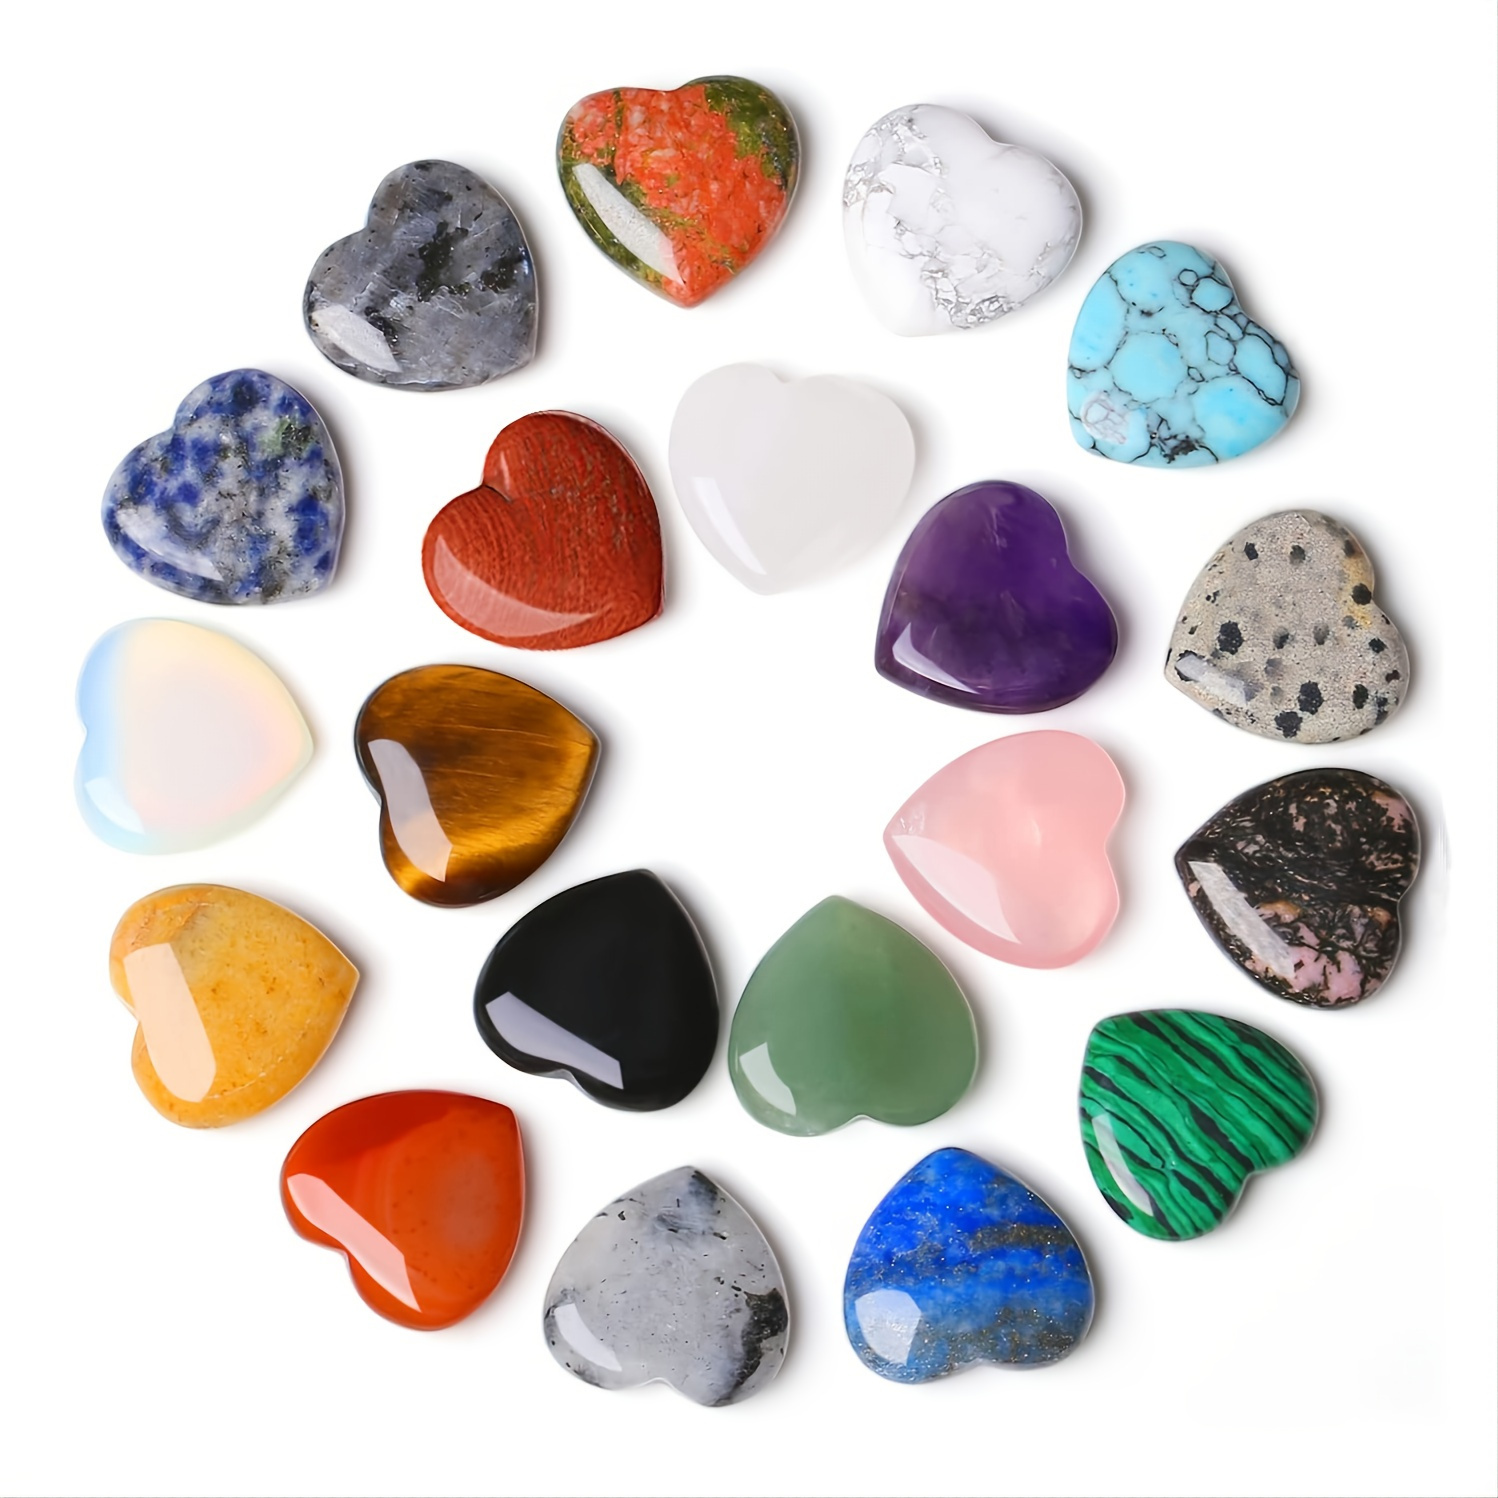 

1pc Natural Tiny Cute Heart Shaped Crystal Stones 0.78inch Worry Stones Bulks Assorted Heart Palm Pocket Healing Carved Love Heart Stones, Size 0.78*0.78*0.24in/20*20*6mm